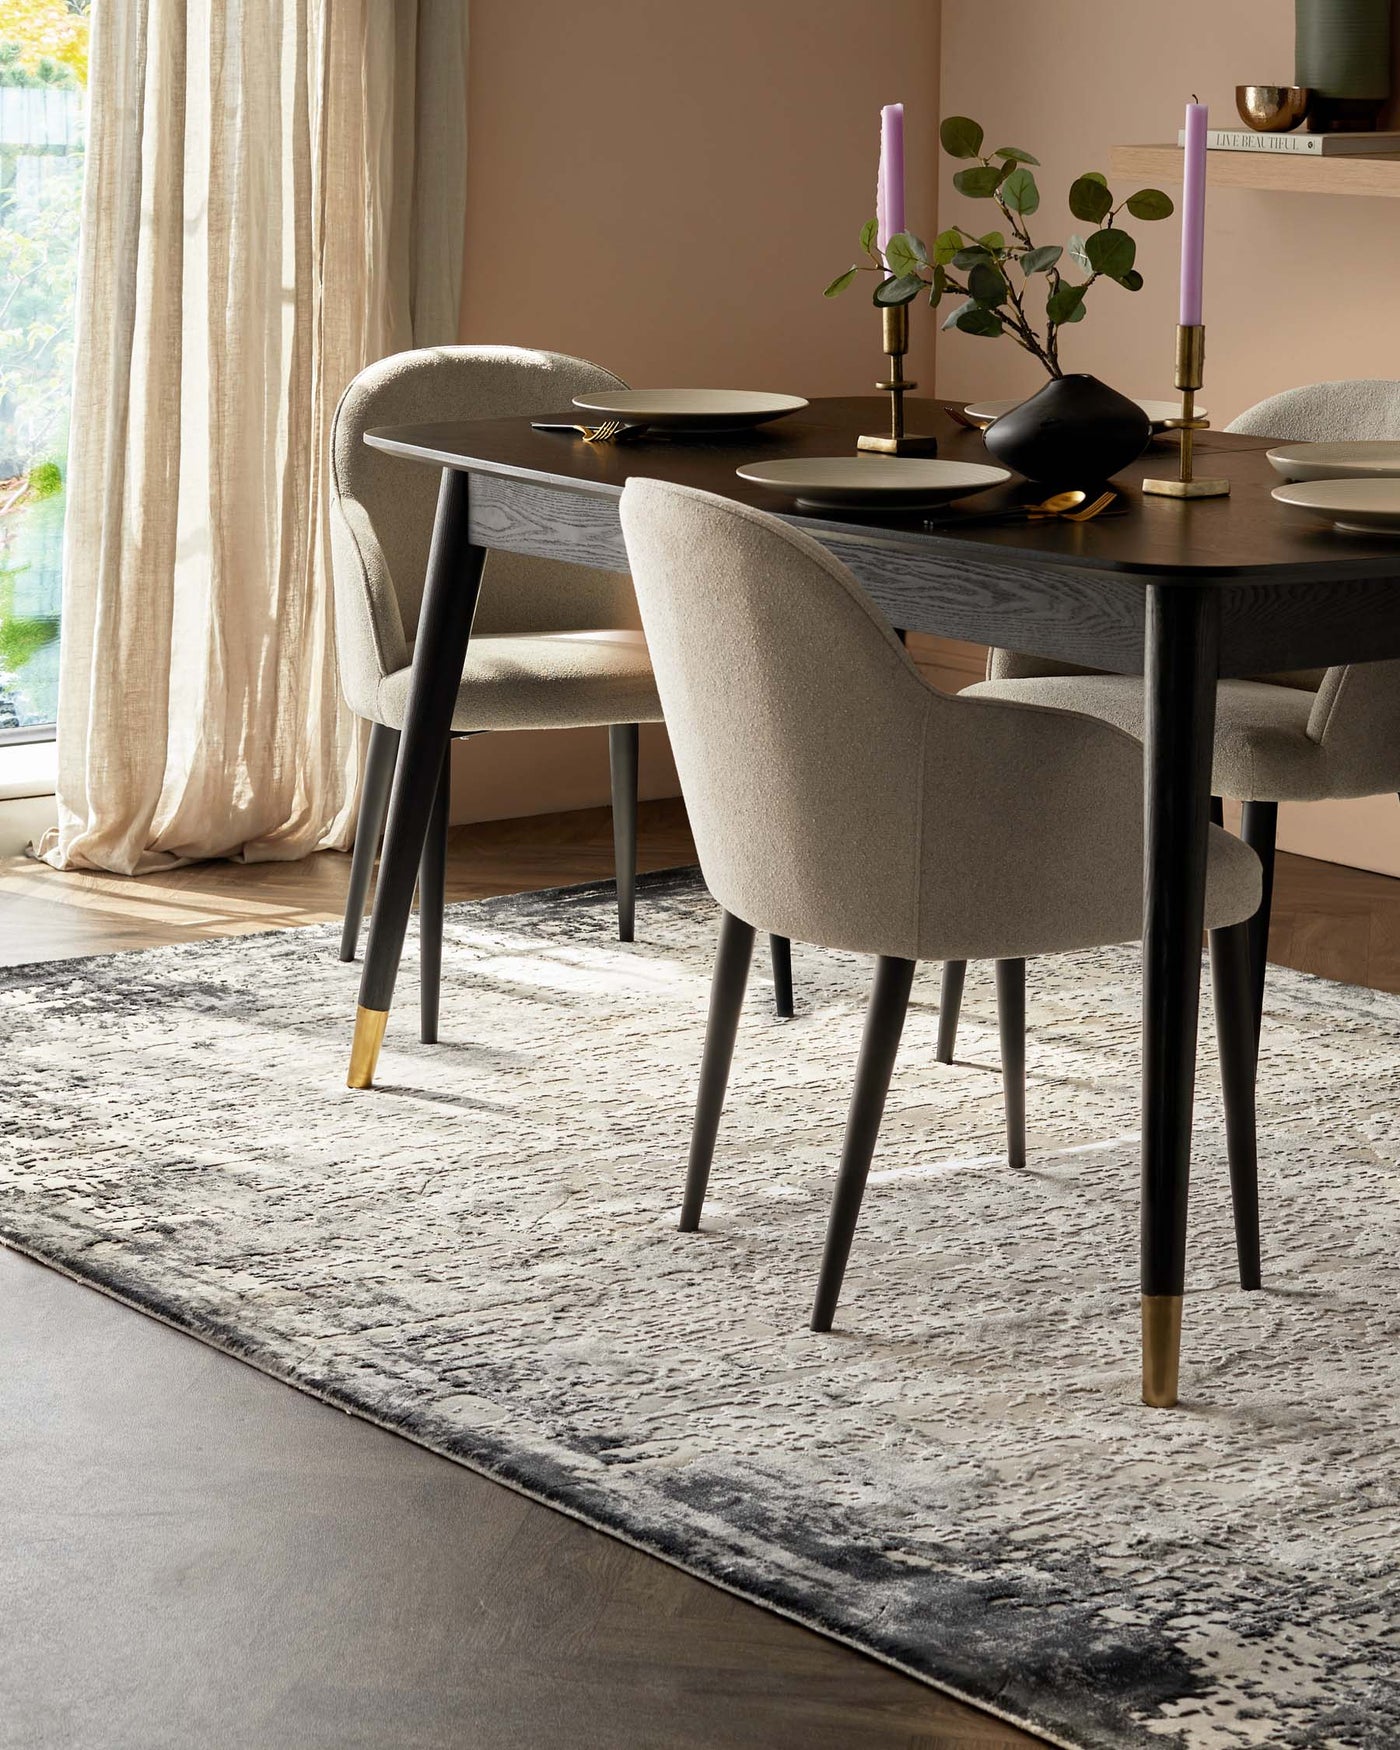 Elegant modern dining area featuring a round, dark wooden table with tapering black legs accented with gold tips. The table is surrounded by four plush, curved-back chairs upholstered in a light, textured fabric, with legs mirroring the table’s black and gold design. The set rests on a large abstract-patterned area rug in shades of grey and cream, anchoring the space on a warm wood floor.